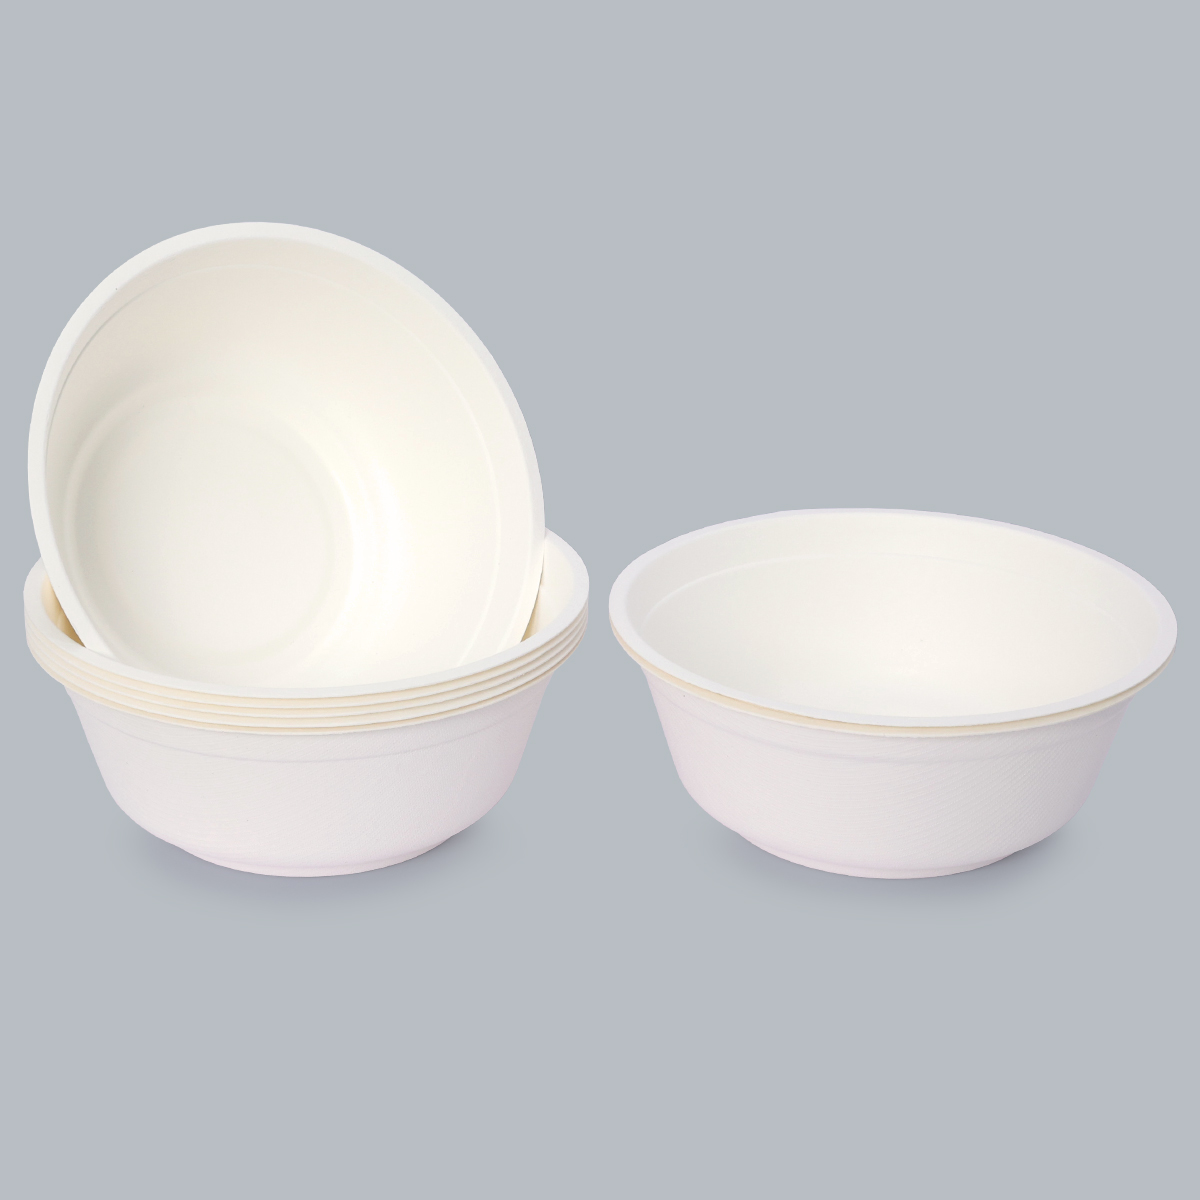 Round bowls Eco-Friendly Food Containers Tableware 910ml Round Bowl